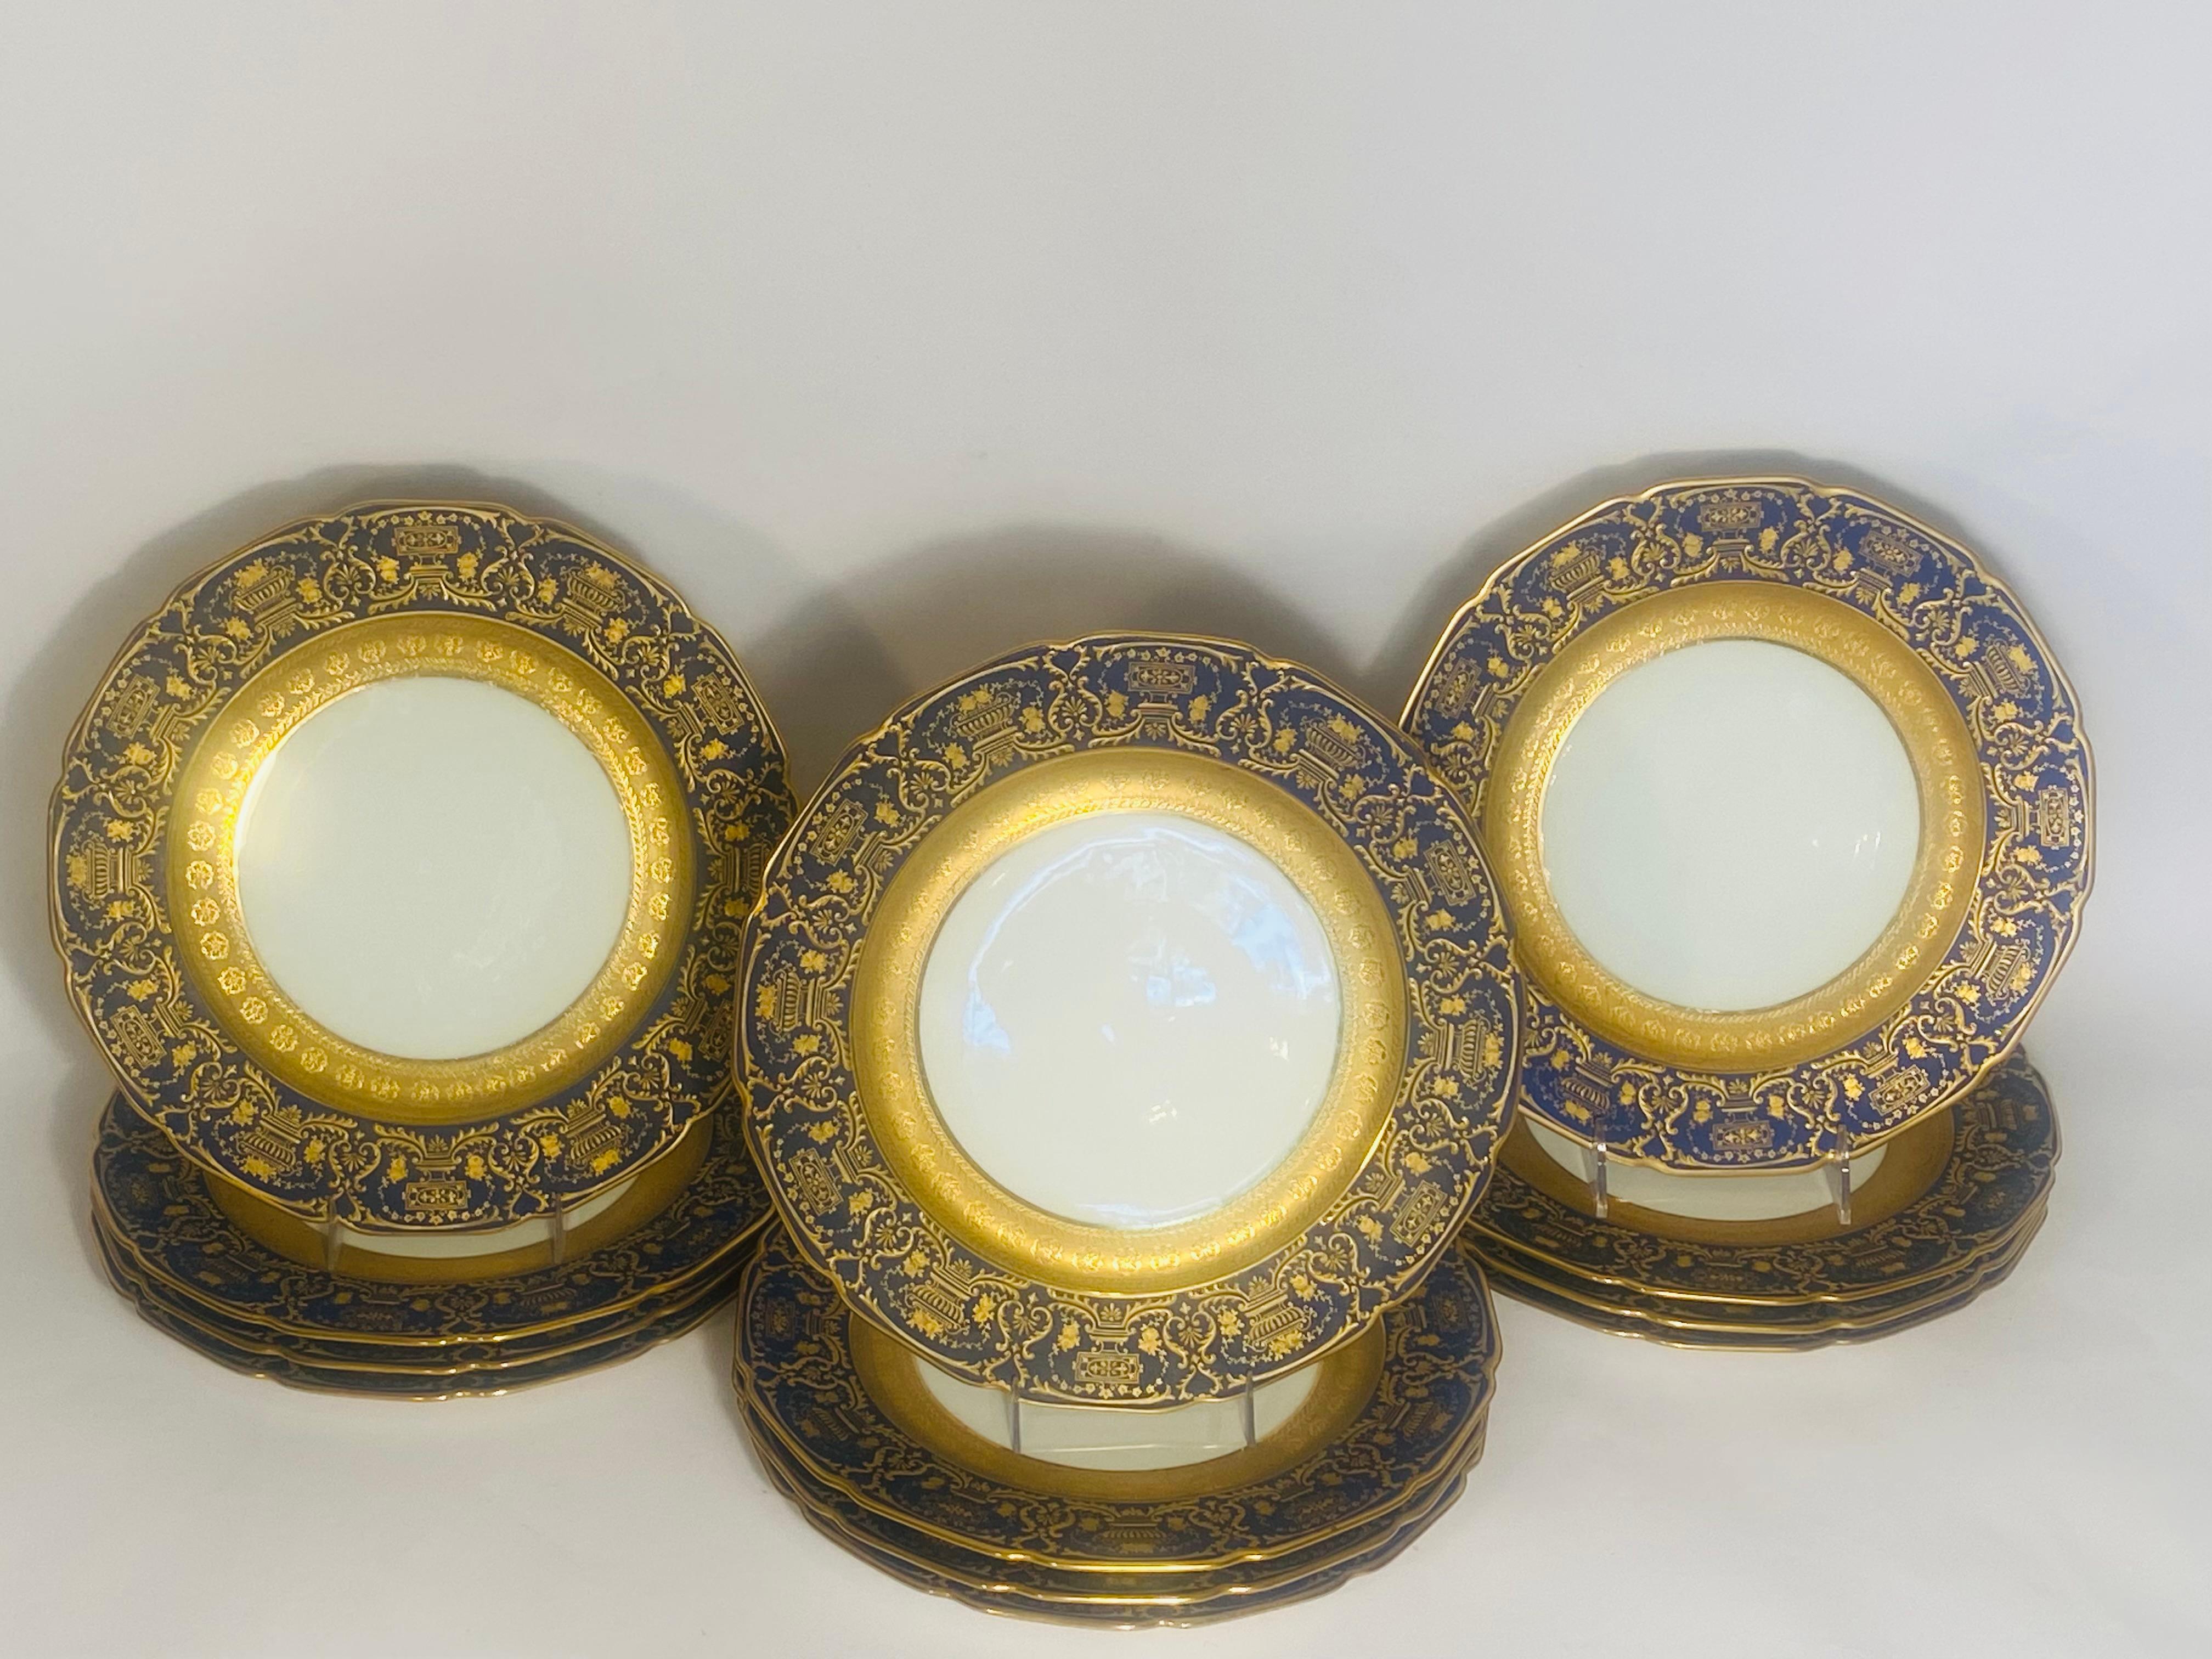 A Set of 12 Cobalt Blue & Raised Gilt Antique Limoges Dinner Plates Circa 1900 In Good Condition For Sale In West Palm Beach, FL